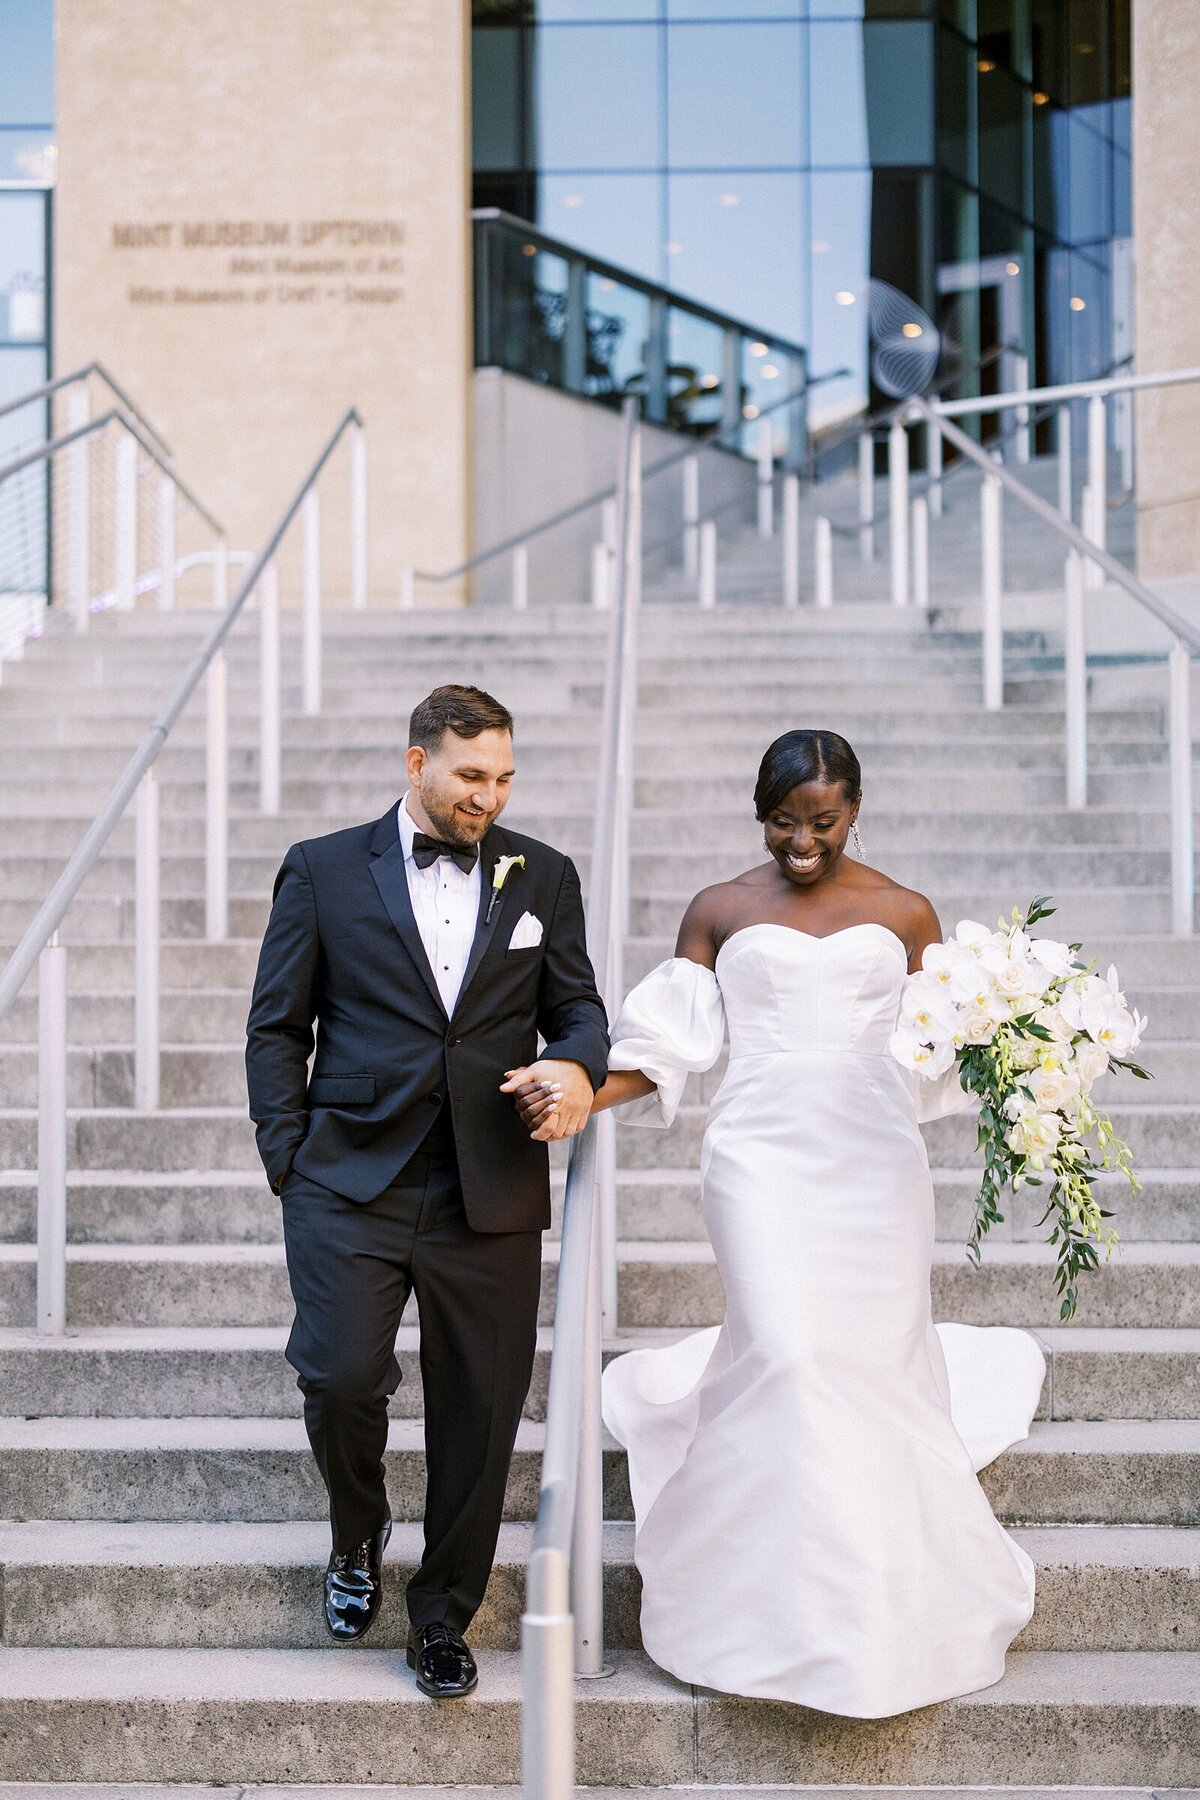 Mint Museum-Charlotte Wedding-Casie Marie Photography-7